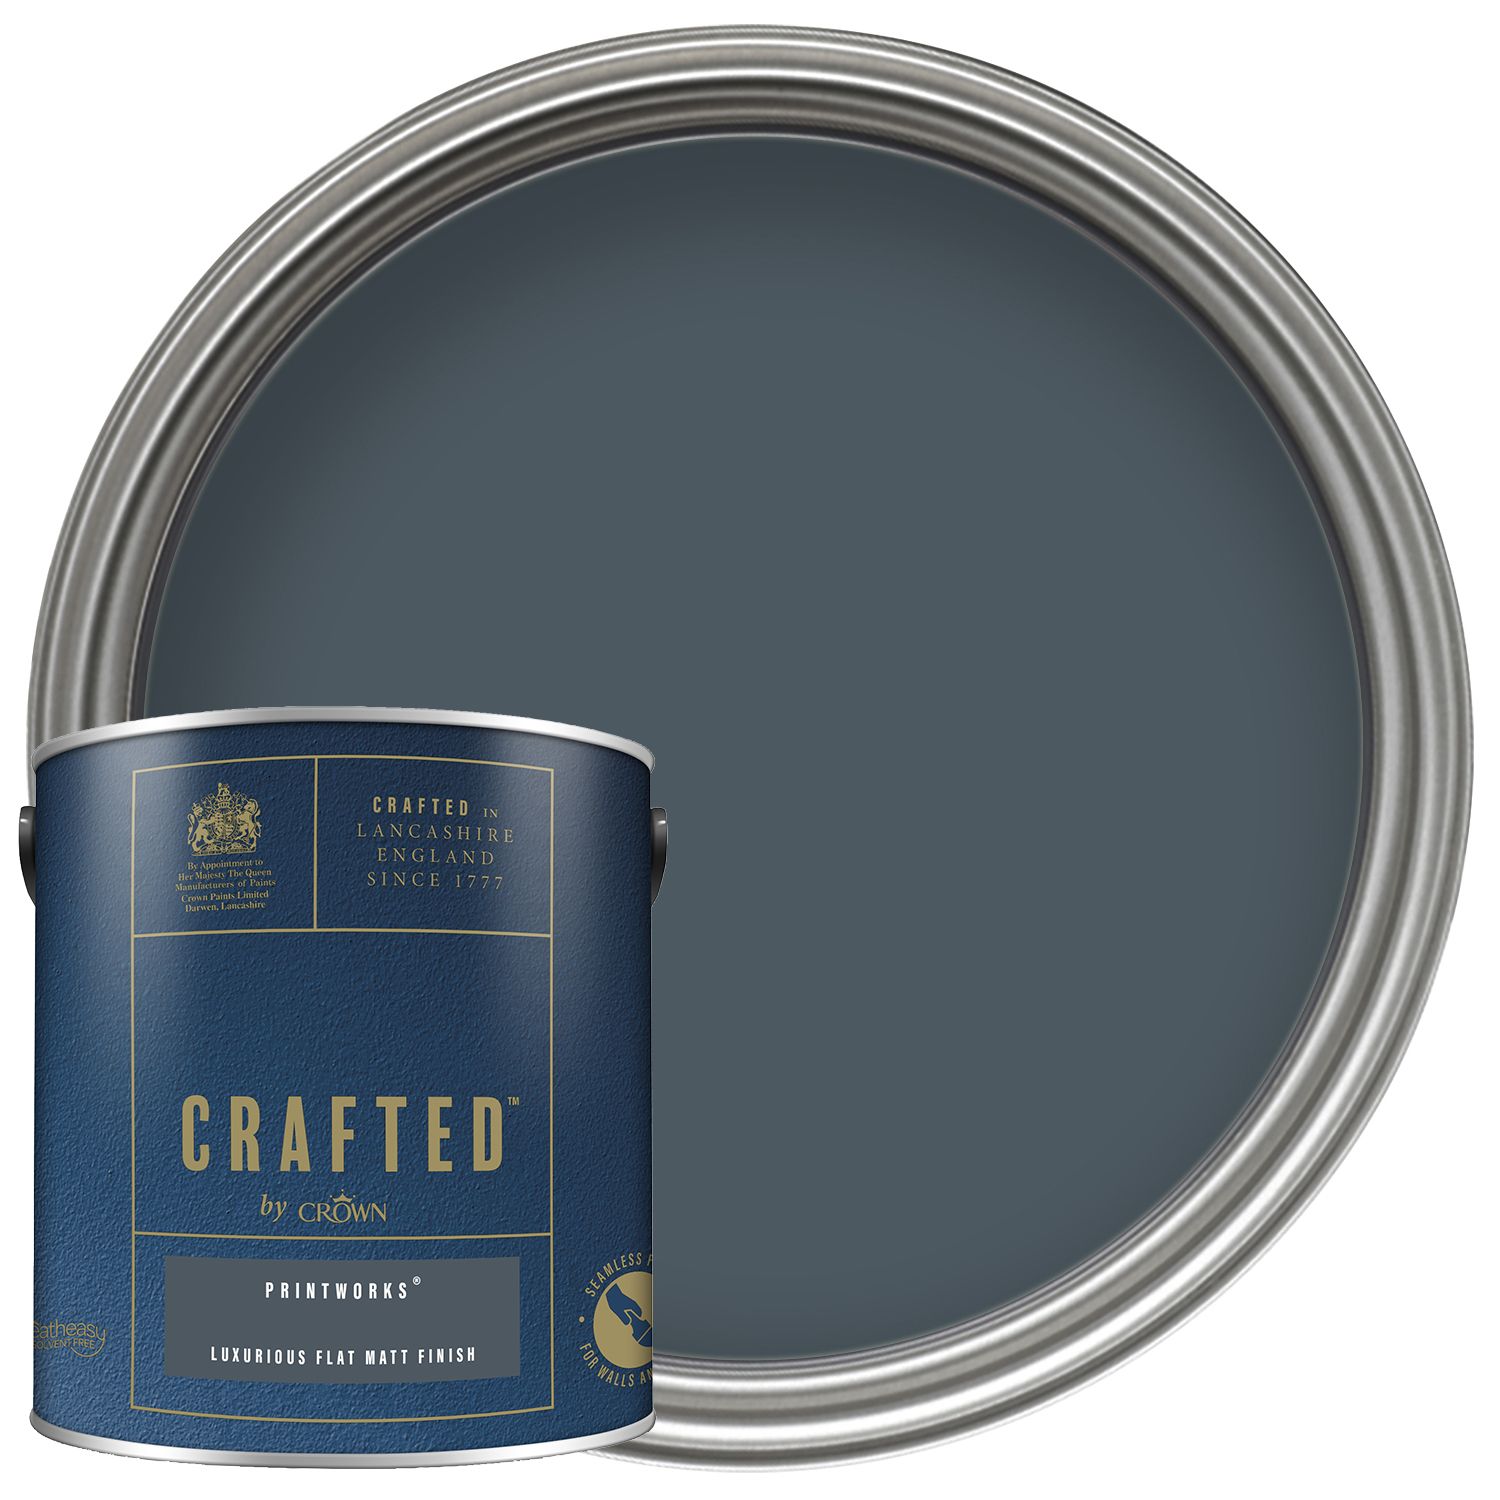 Image of CRAFTED™ by Crown Flat Matt Emulsion Interior Paint - Print Works™ - 2.5L